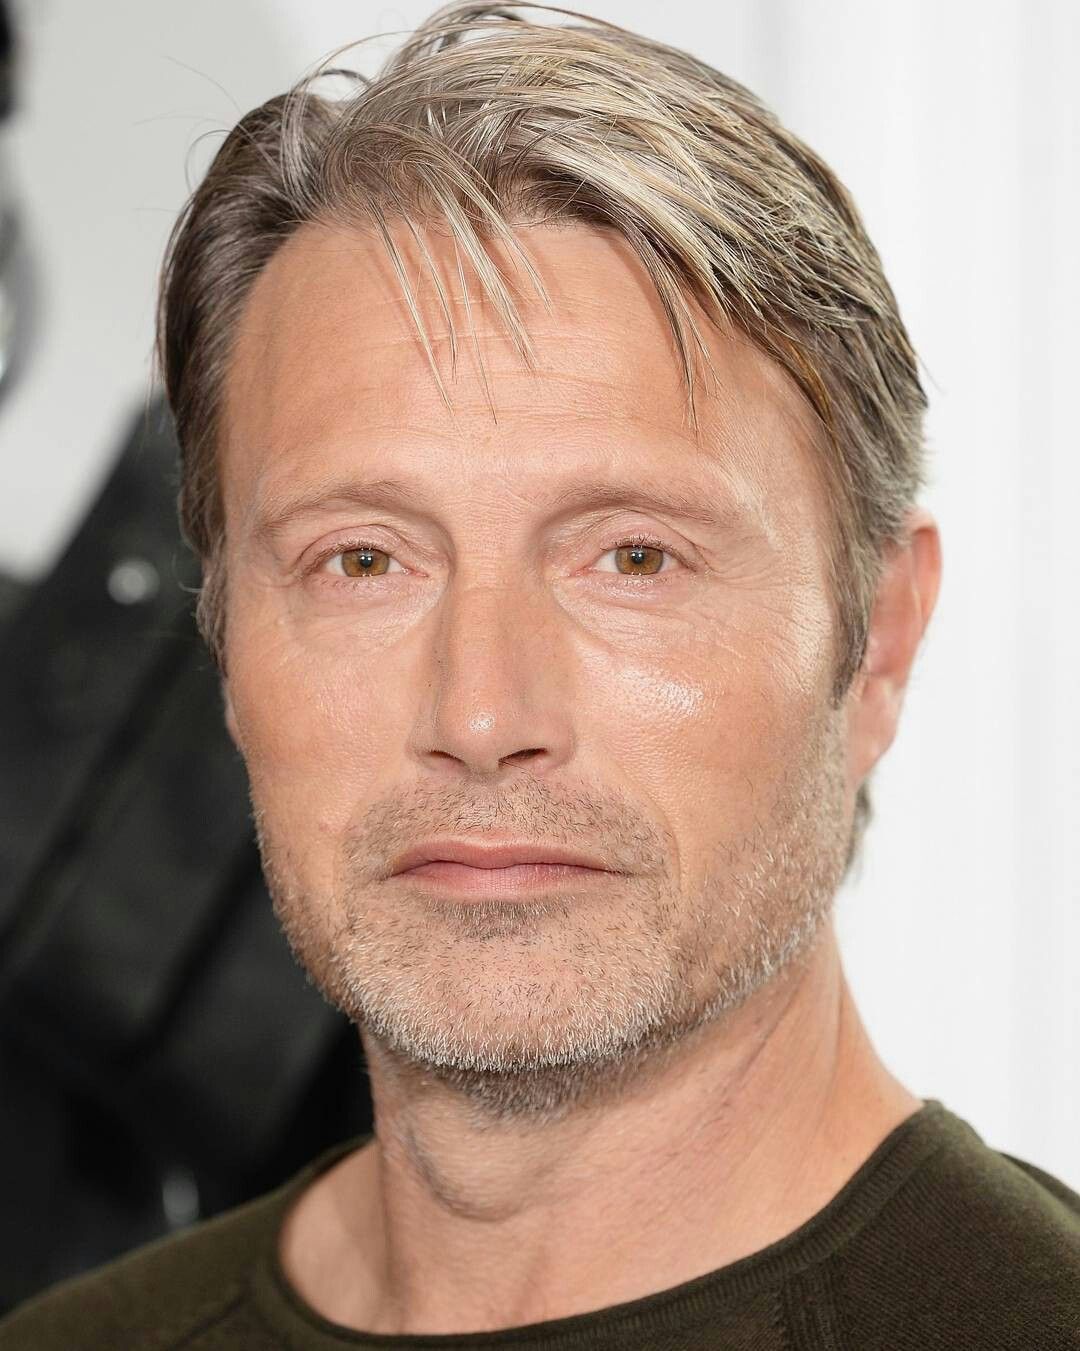 Breaking: Mads Mikkelson to play Cliff Unger in new Death